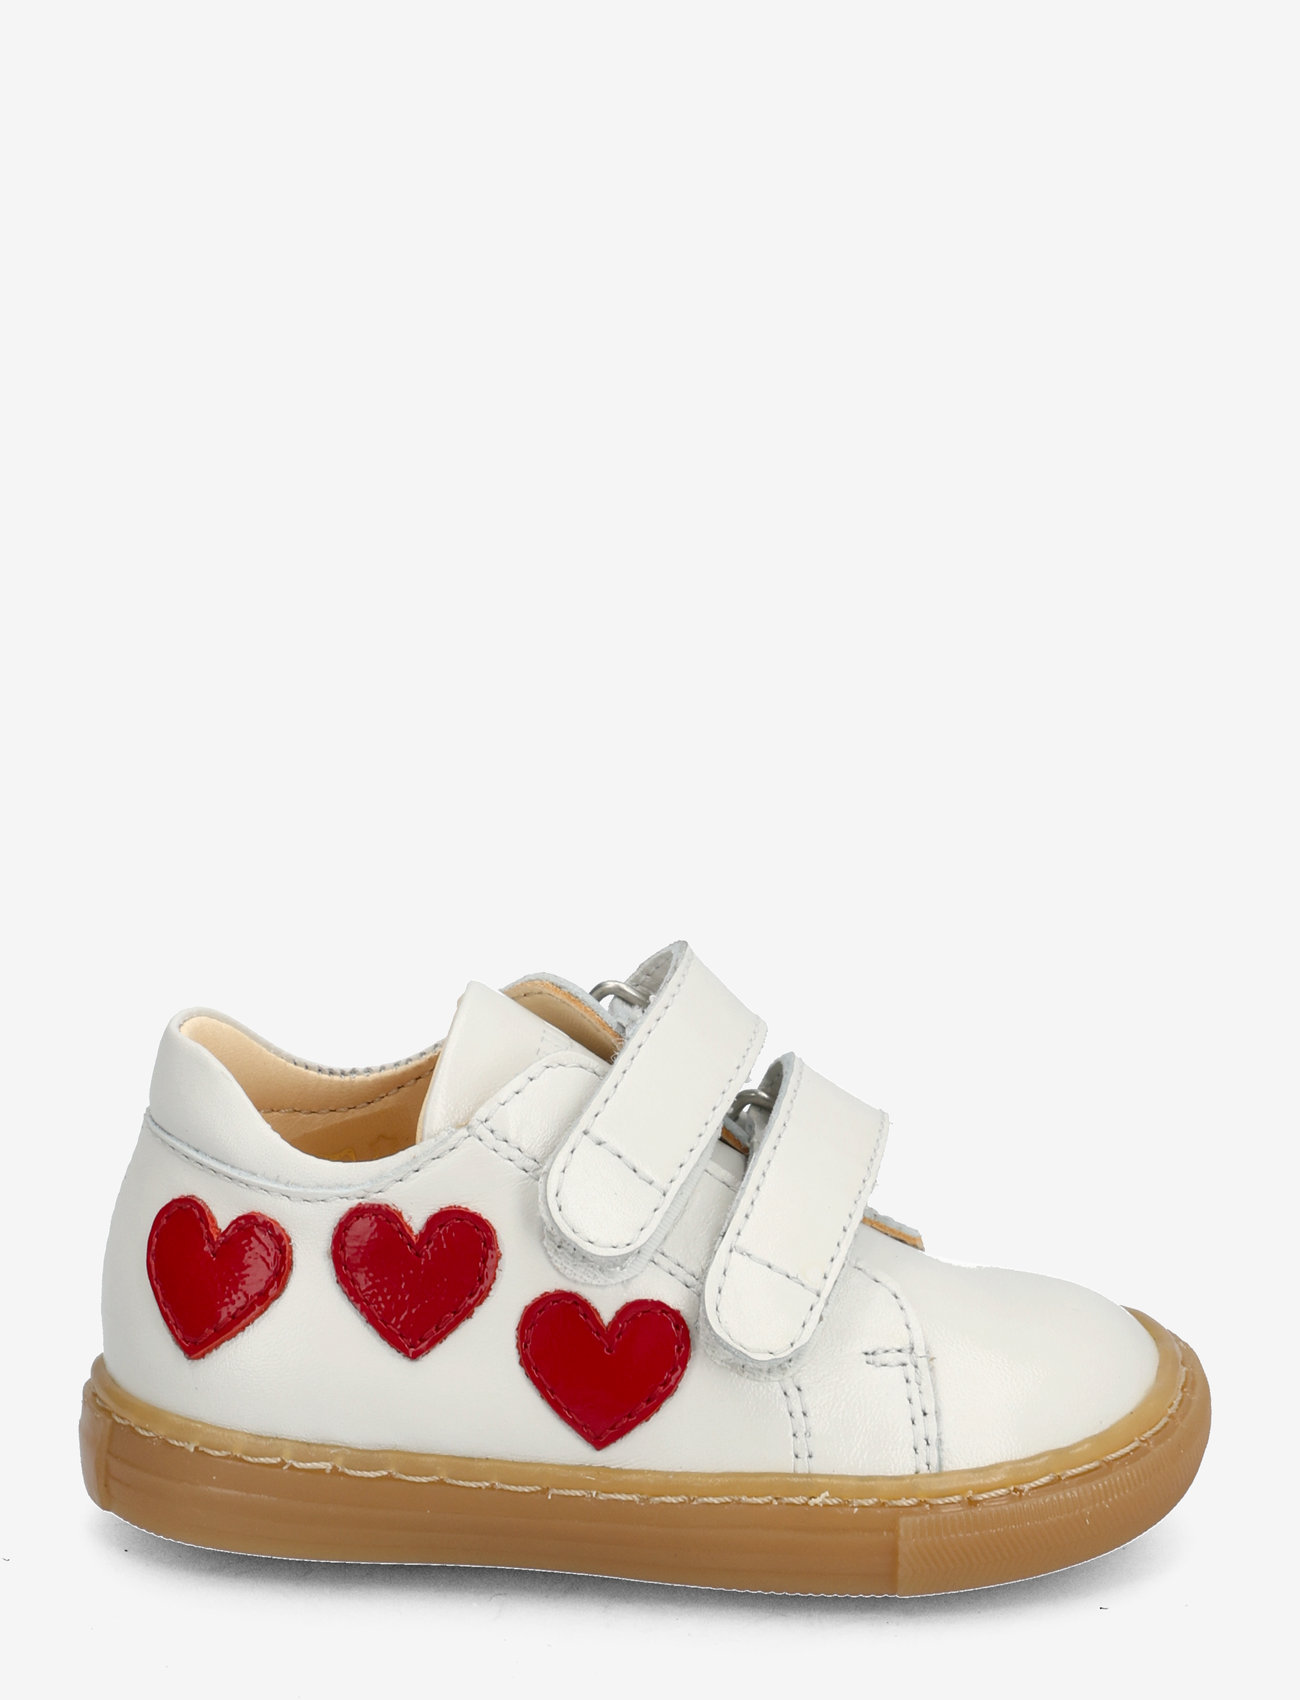 ANGULUS - Shoes - flat - with velcro - zomerkoopjes - 1493/a003 off white/hearts - 1